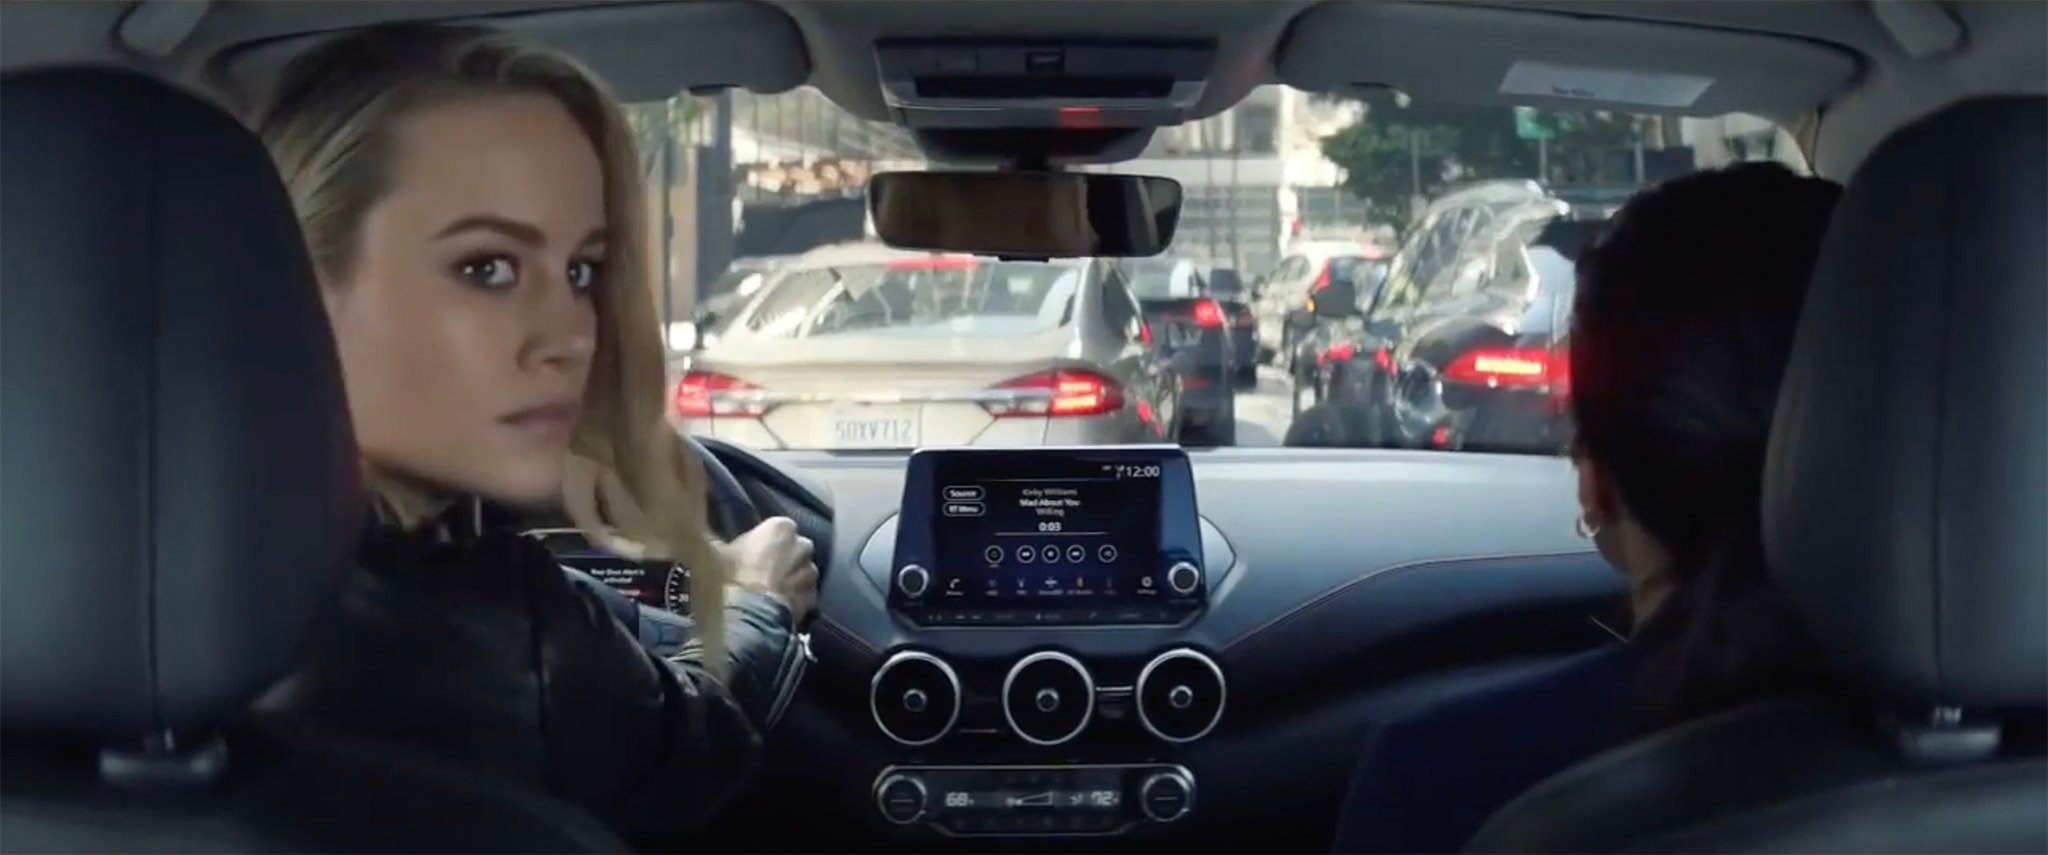 Brie Larson received backlash for starring in a feminist commercial for Nissan Sentra